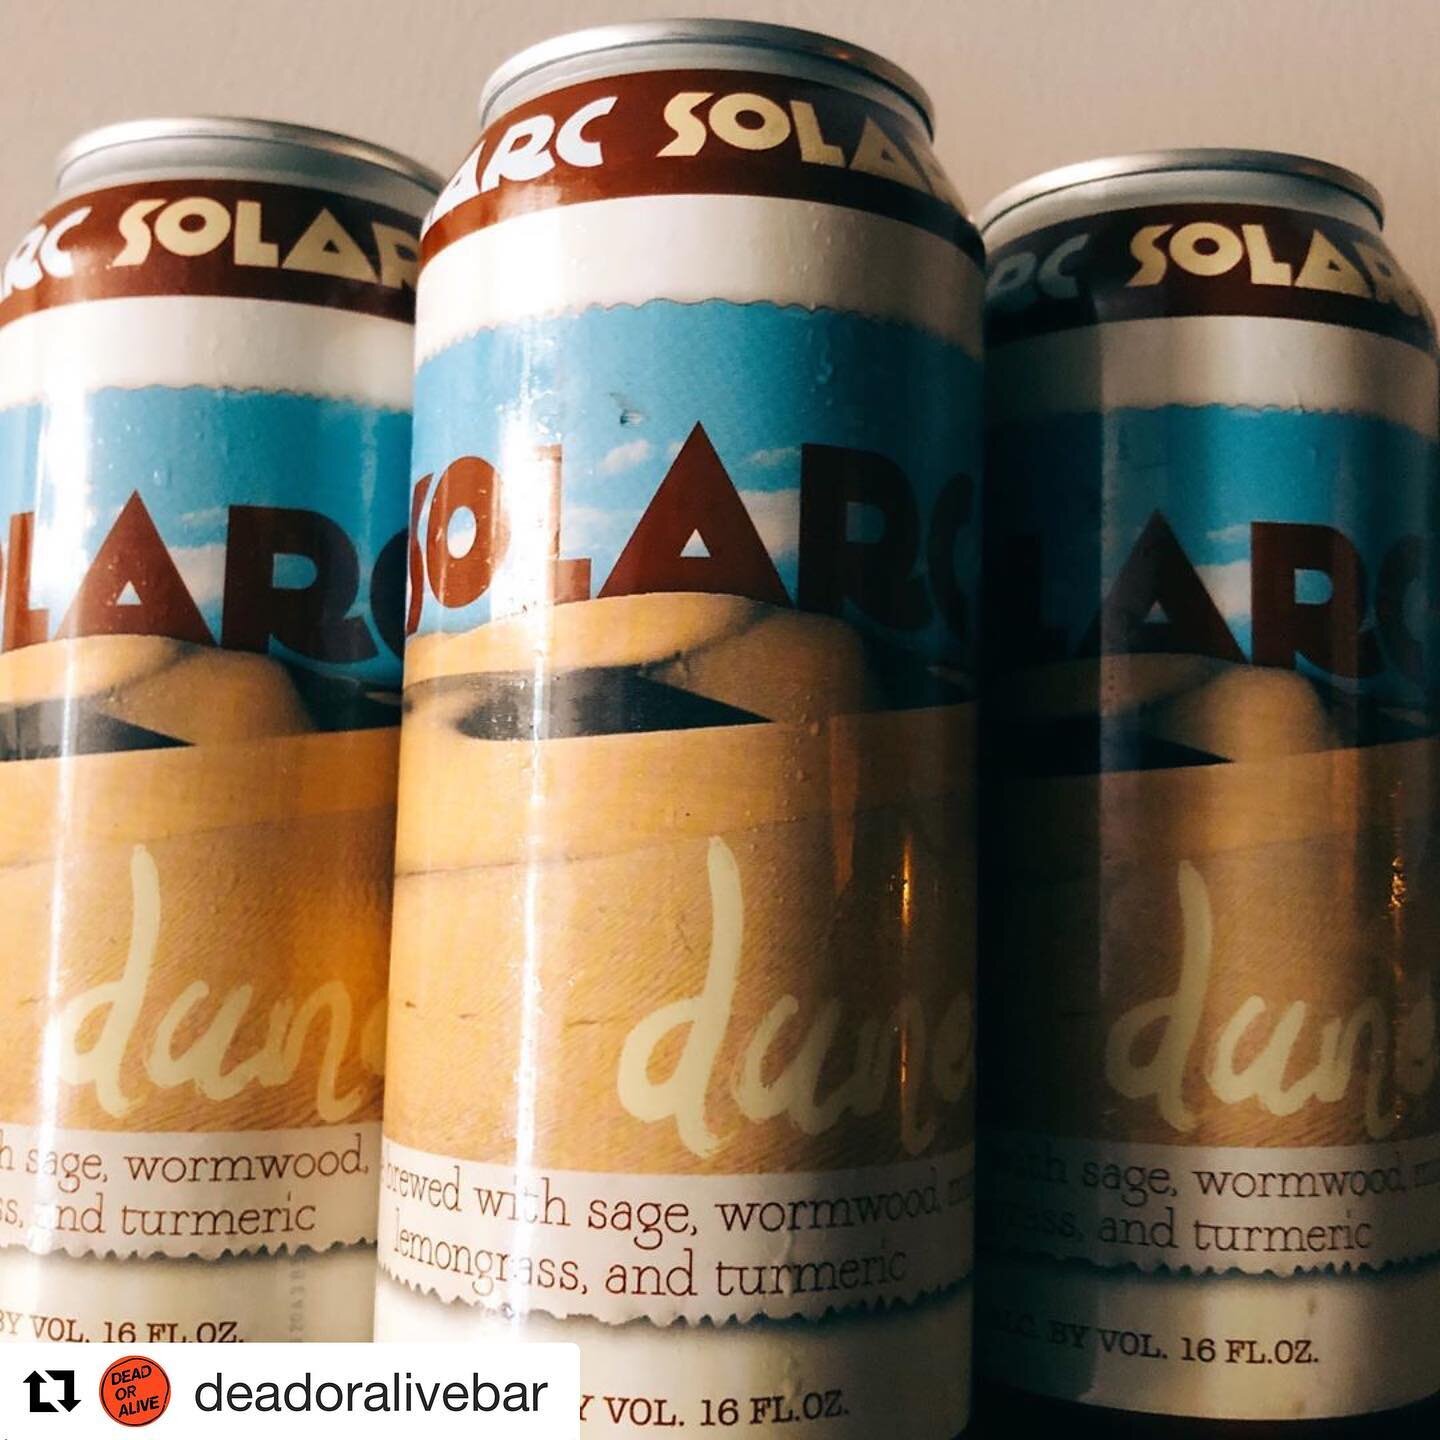 Our favorite desert bar @deadoralivebar is fully stocked with DUNES! Swing by next time you&rsquo;re in Palm Springs ~ ~

#Repost @deadoralivebar ・・・
If you know us you know our love and devotion to @solarcbrewing ~ ✨ we almost always have one or two